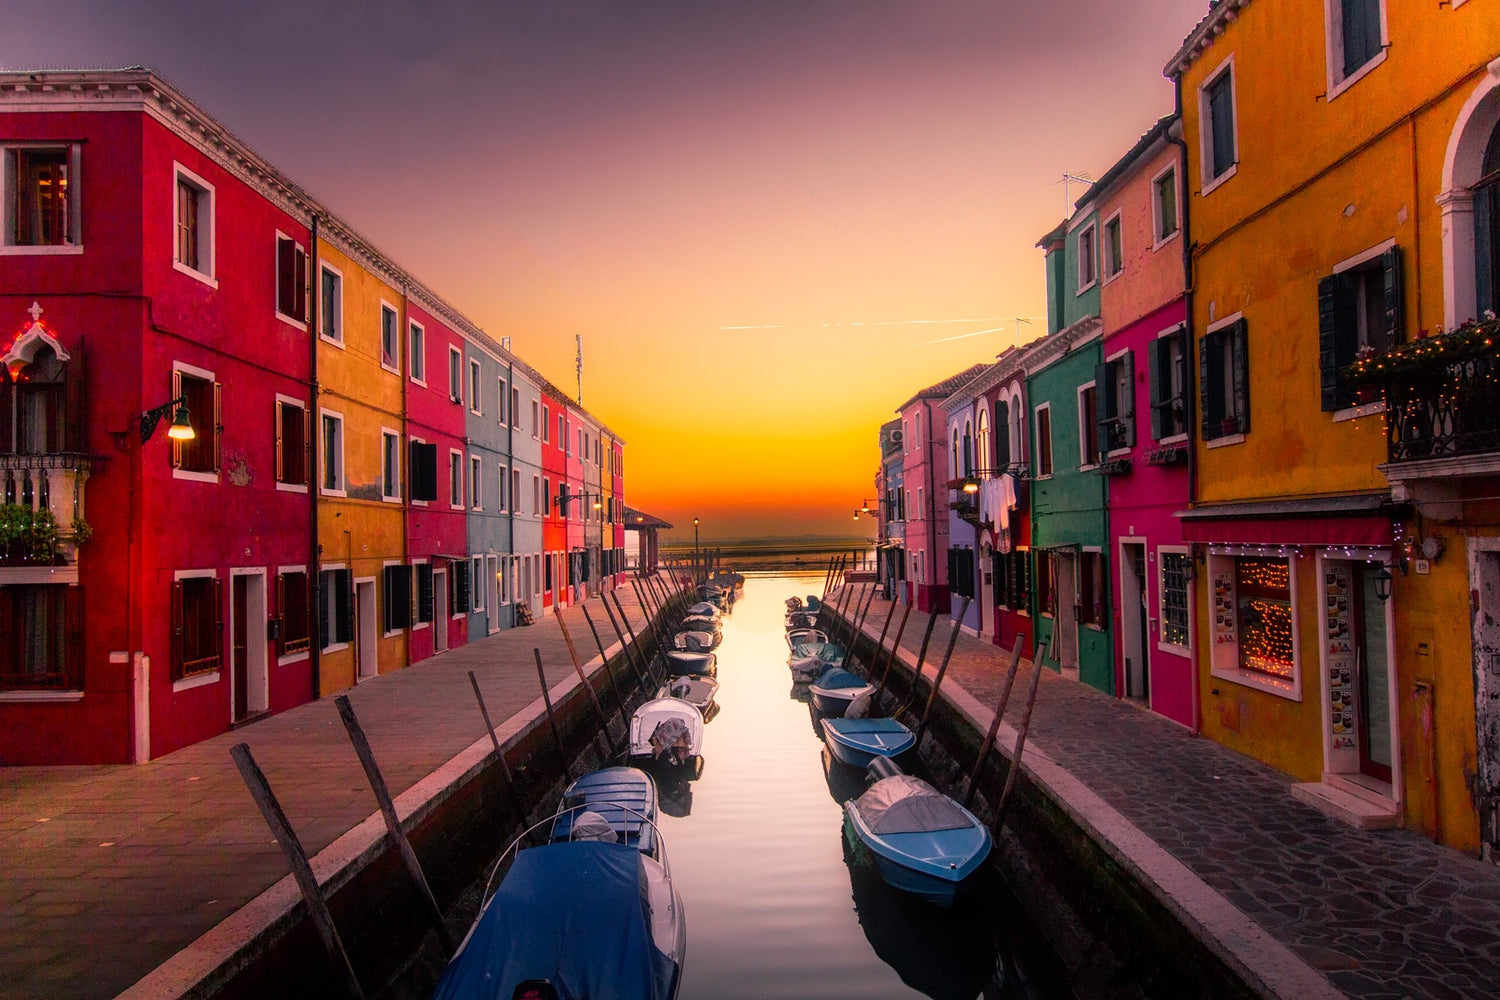 Burano a beautiful, colourful island village famous for its colourful building